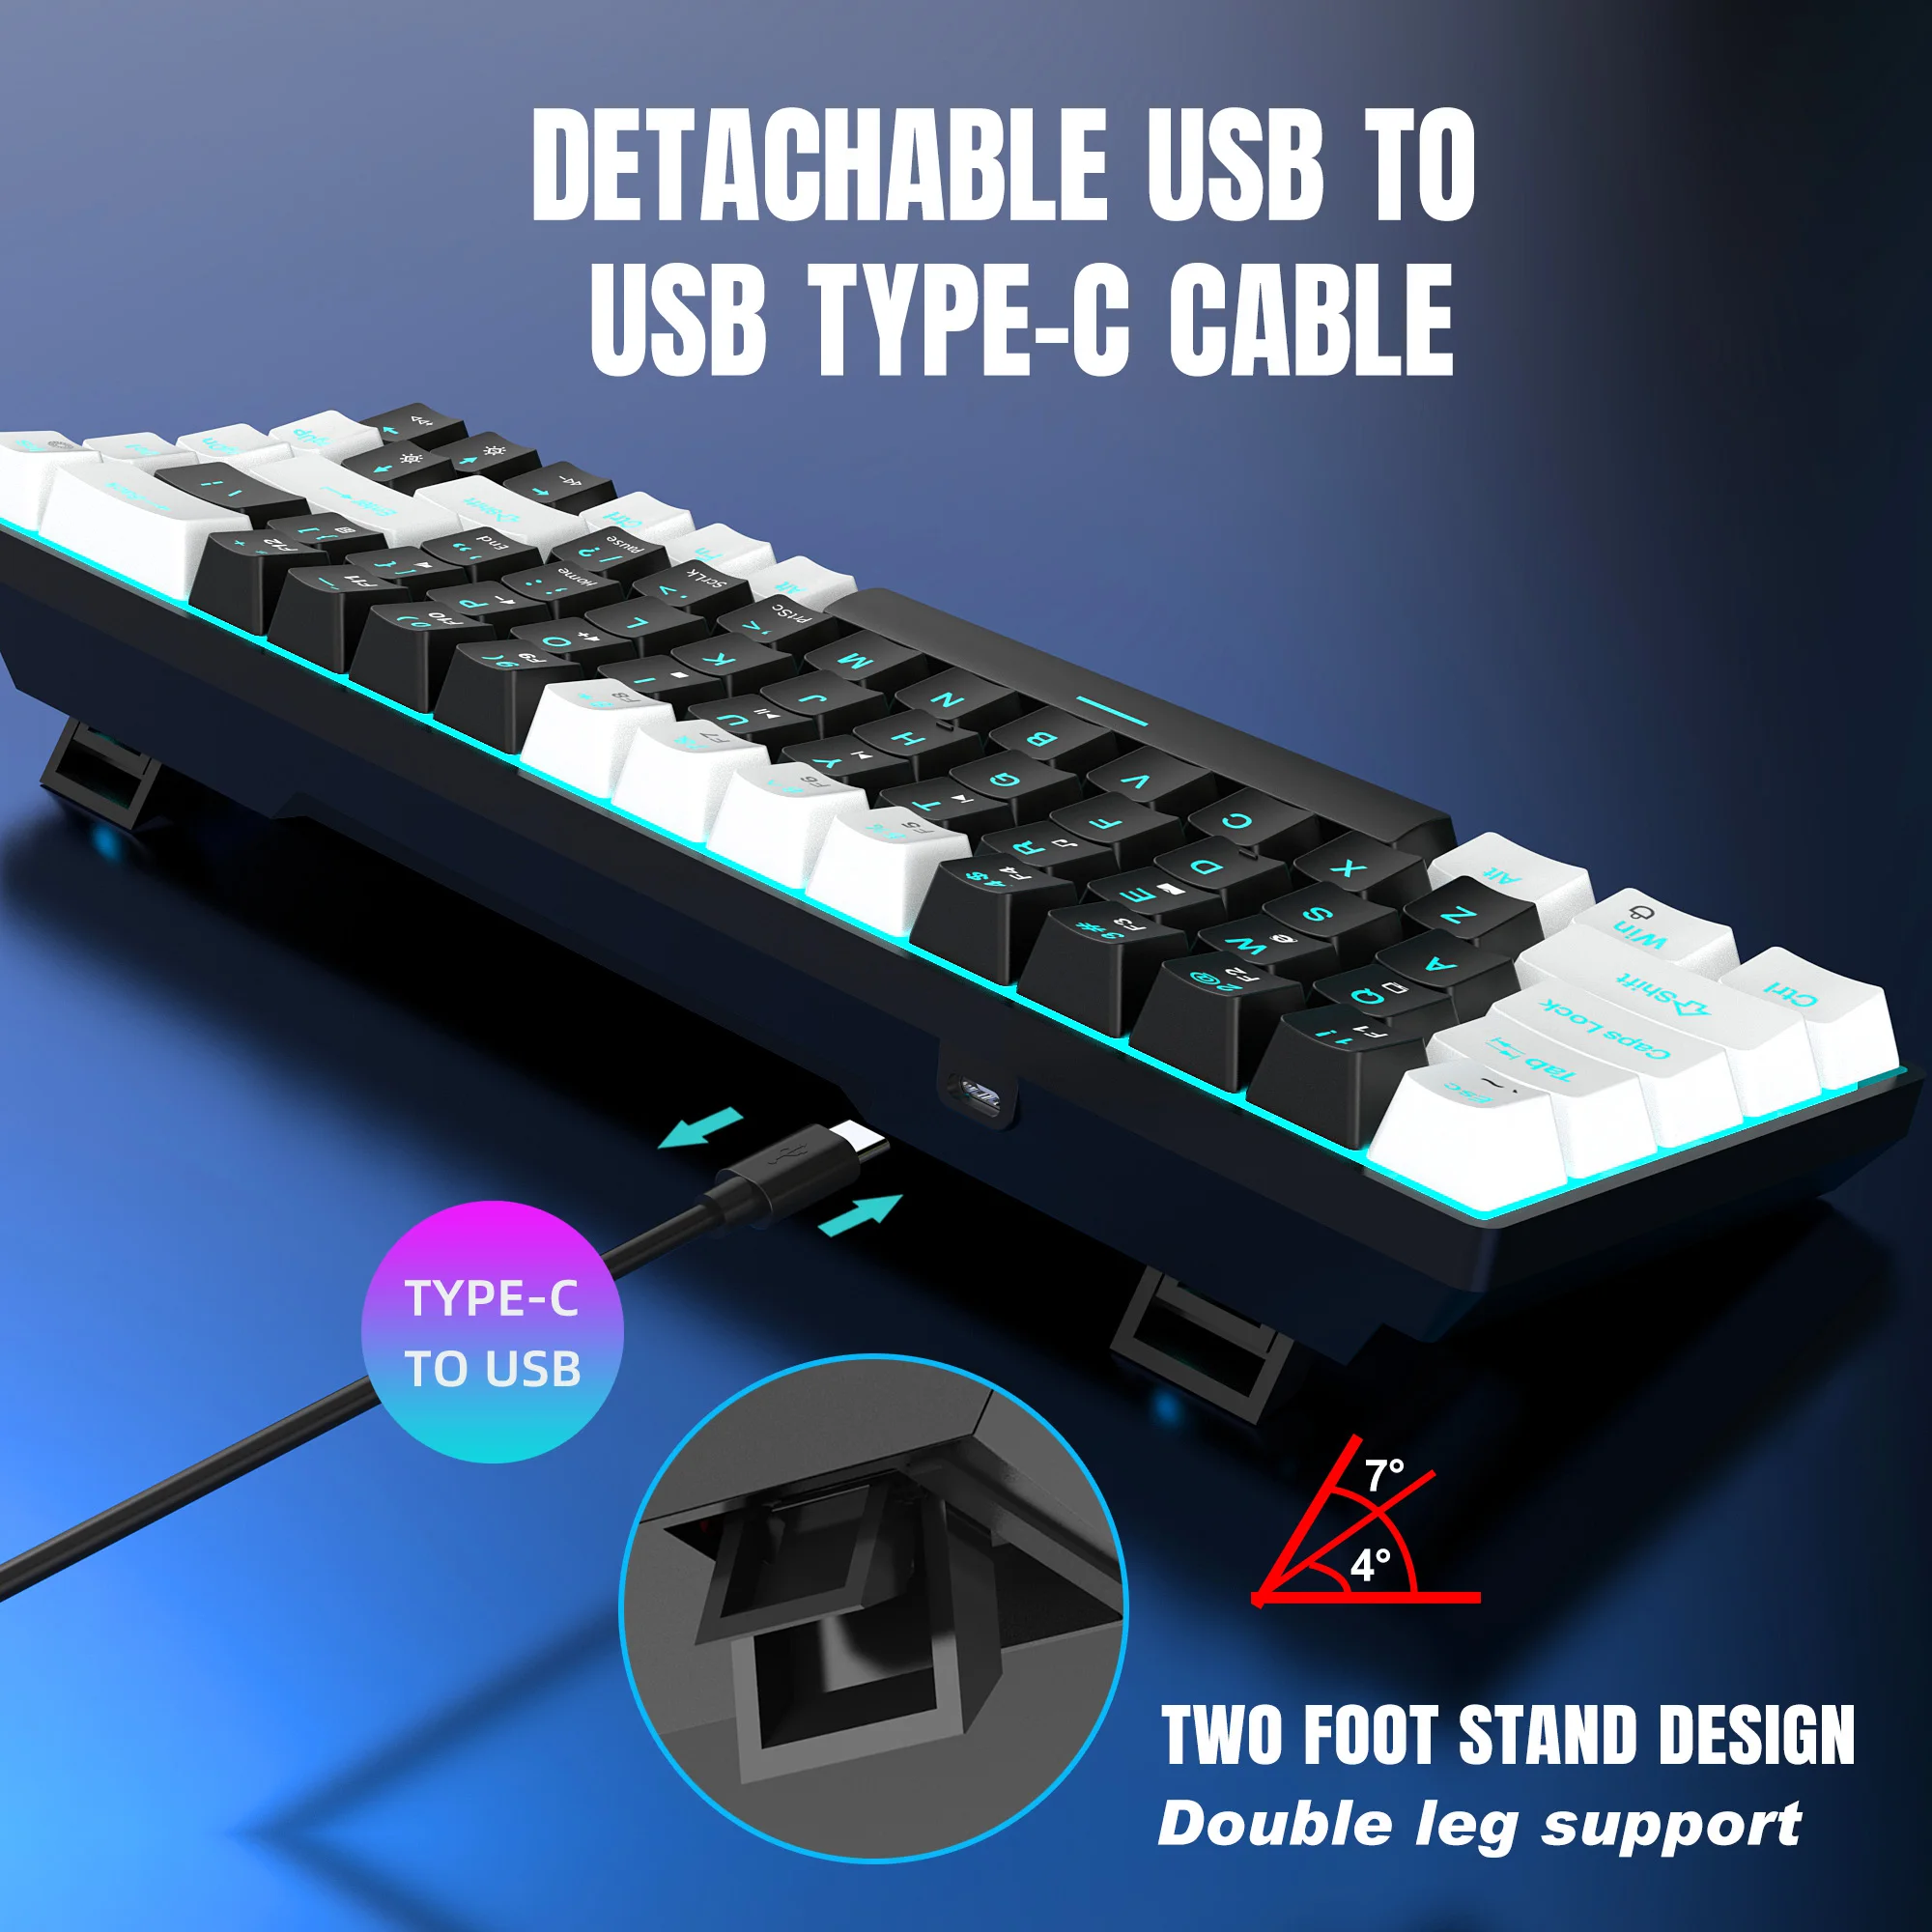 68 Keys Mechanical Keyboard Ergonomics RGB Backlit LED Hot Swappable Blue Switch Gaming Keyboard for PC Laptop Office